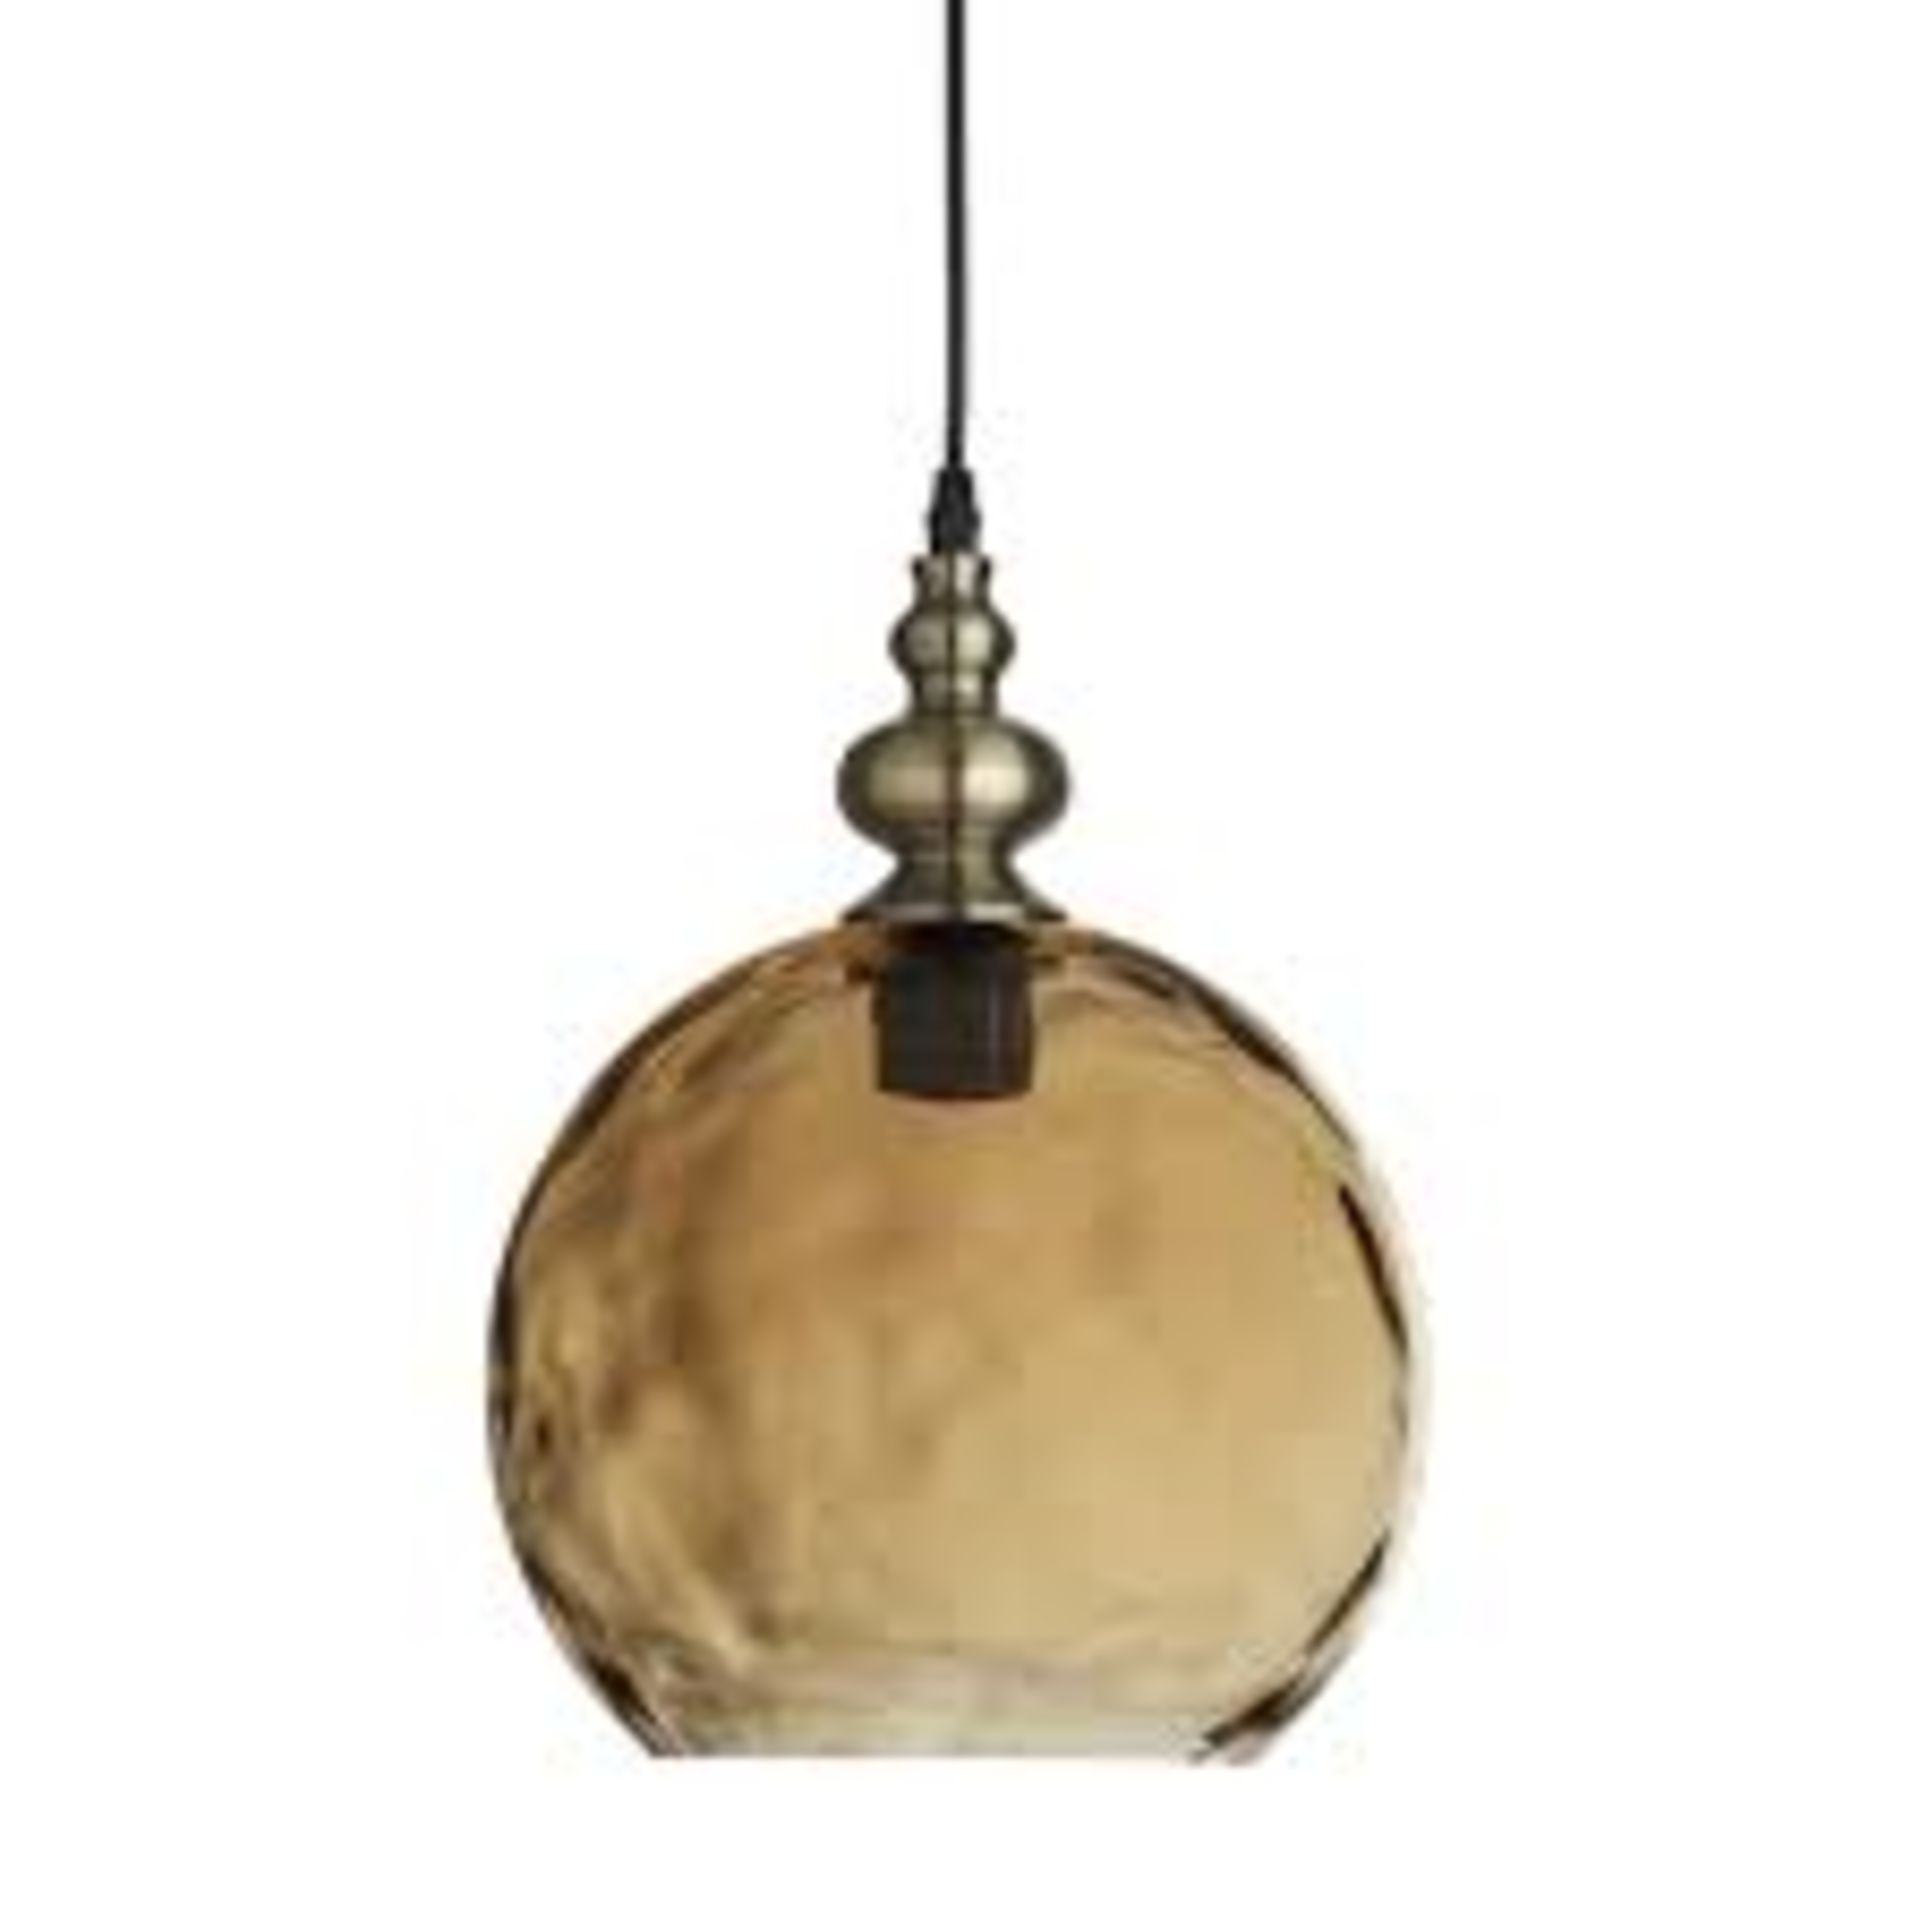 1 x Indiana Globe Pendant in antique brass - Ref: 2020AM - New And Boxed Stock - RRP: £80 - Image 4 of 4